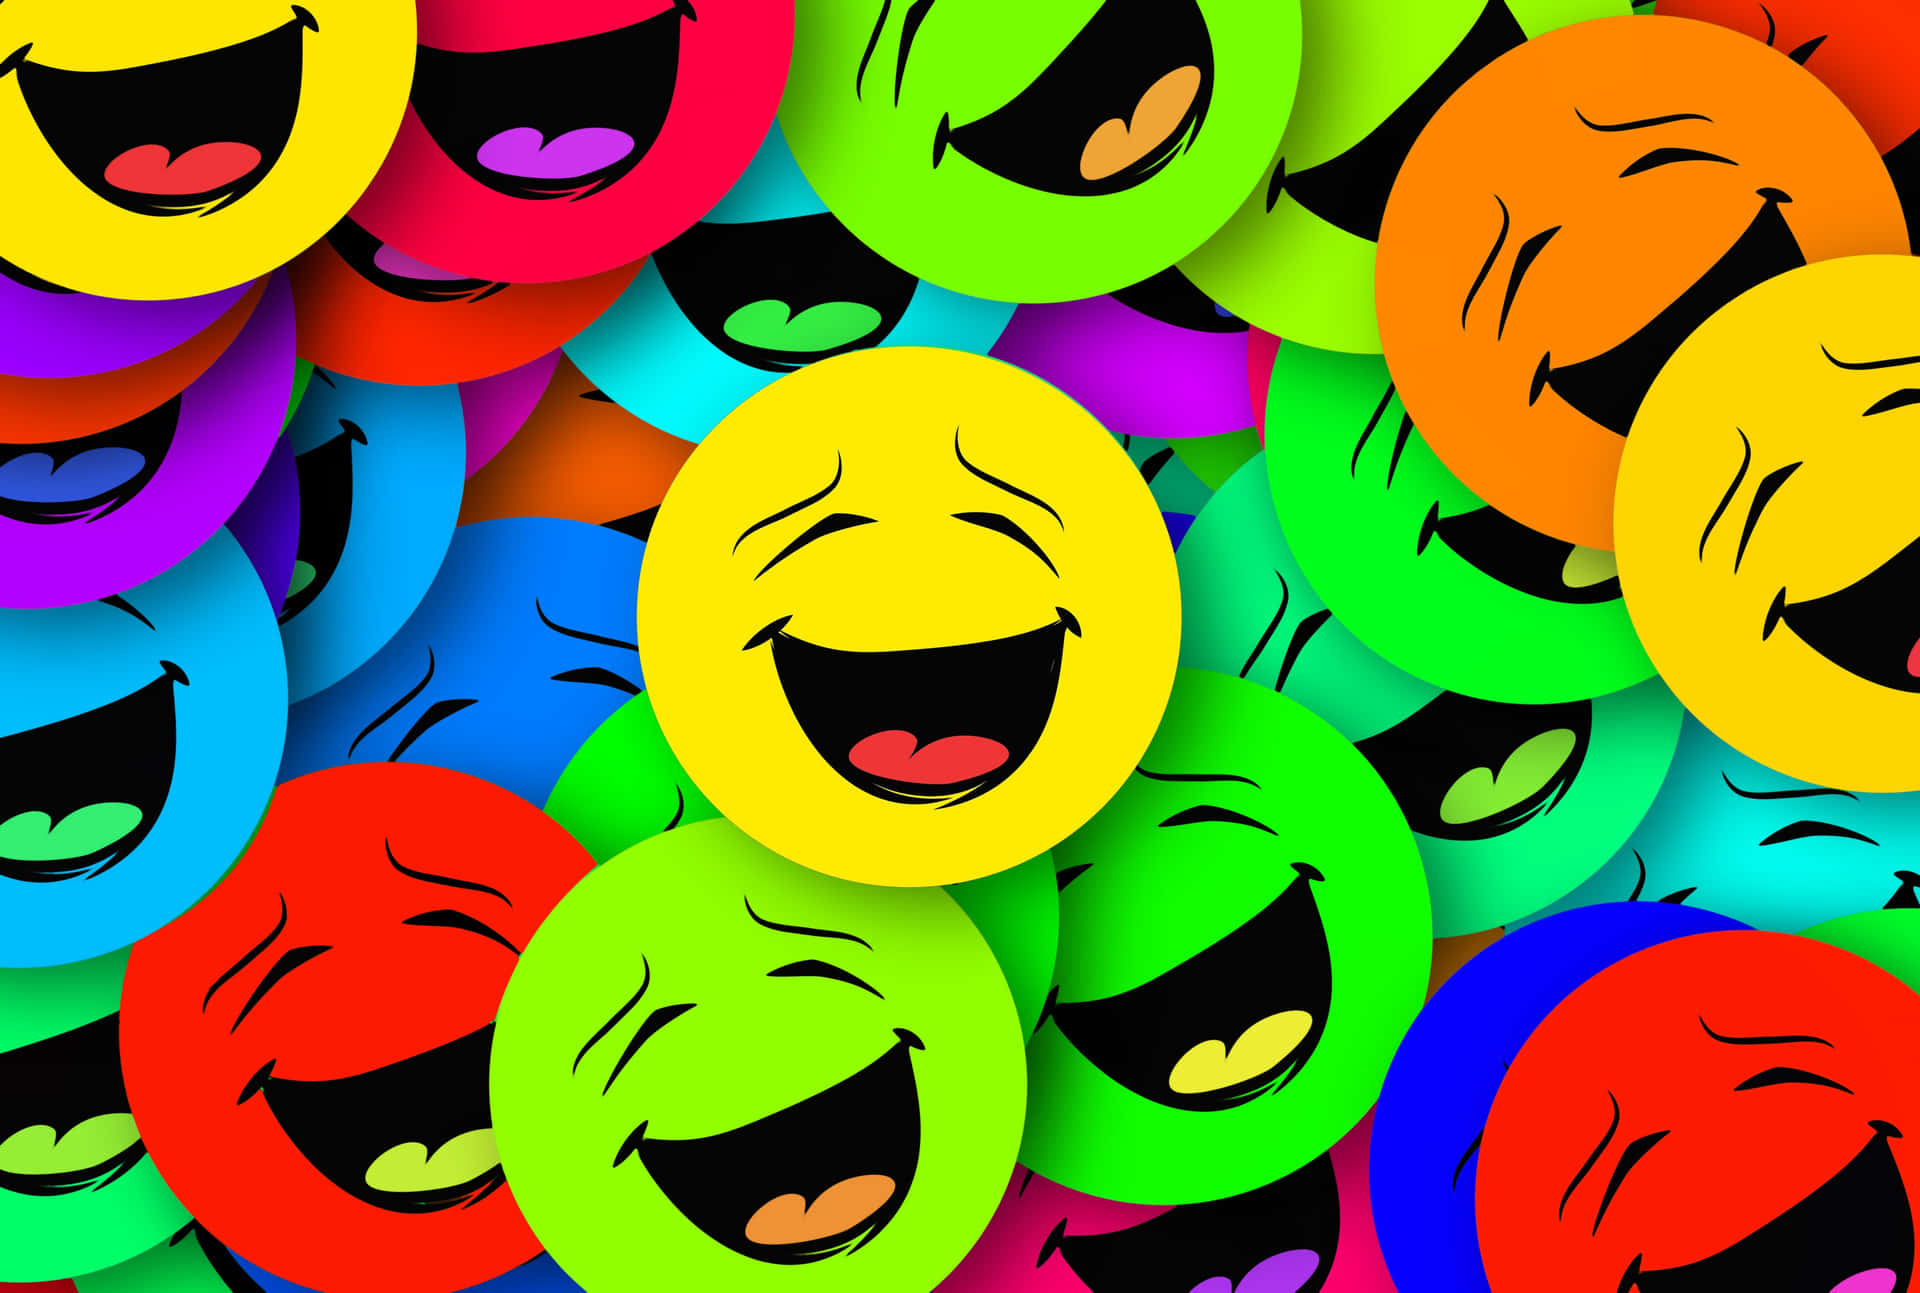 A Colorful Group Of Smiling Emoticons